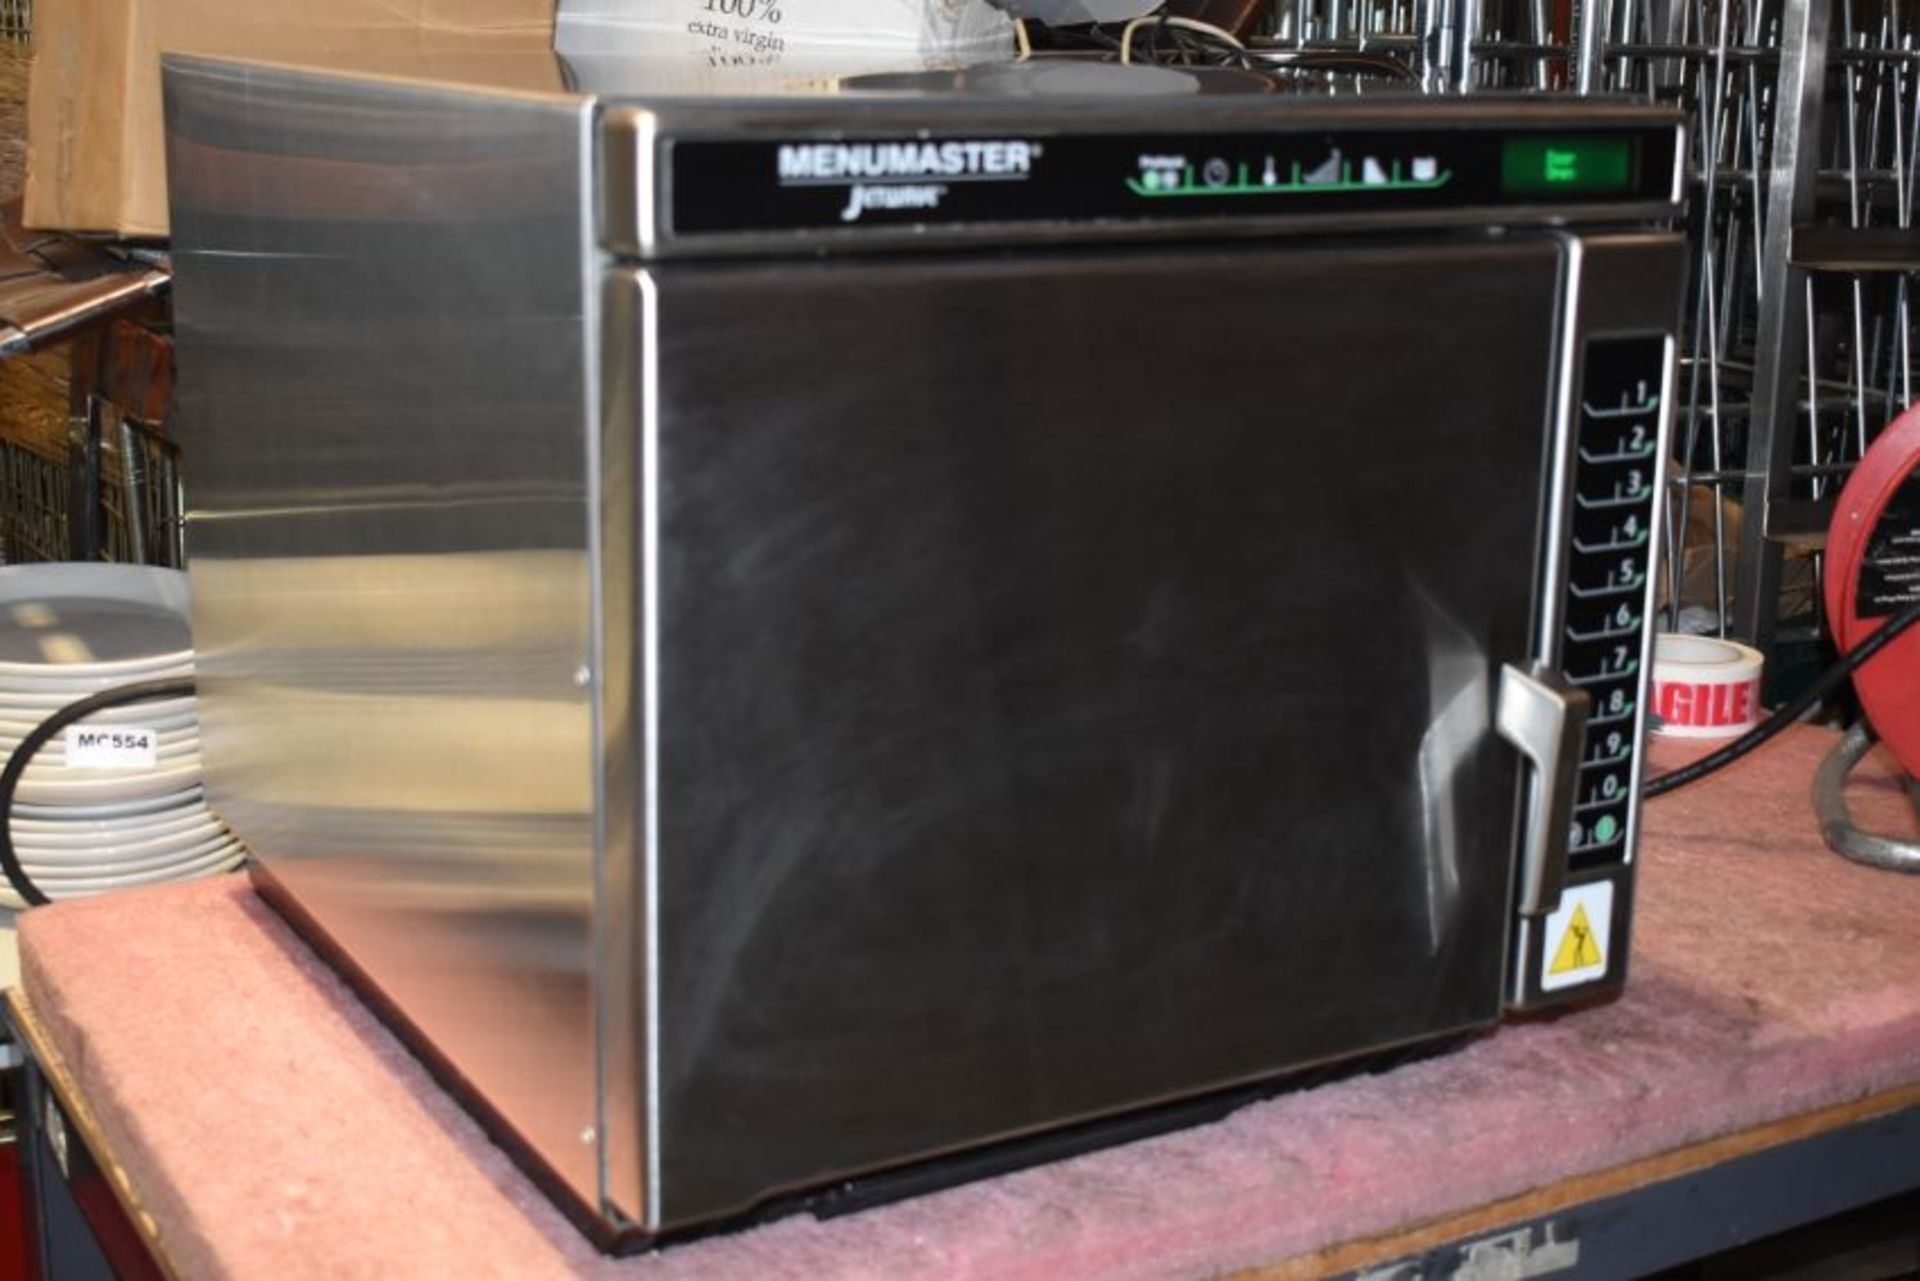 1 x Menumaster Jetwave JET514U High Speed Combination Microwave Oven - RRP £2,400 - CL232 - Ref: IN2 - Image 5 of 9